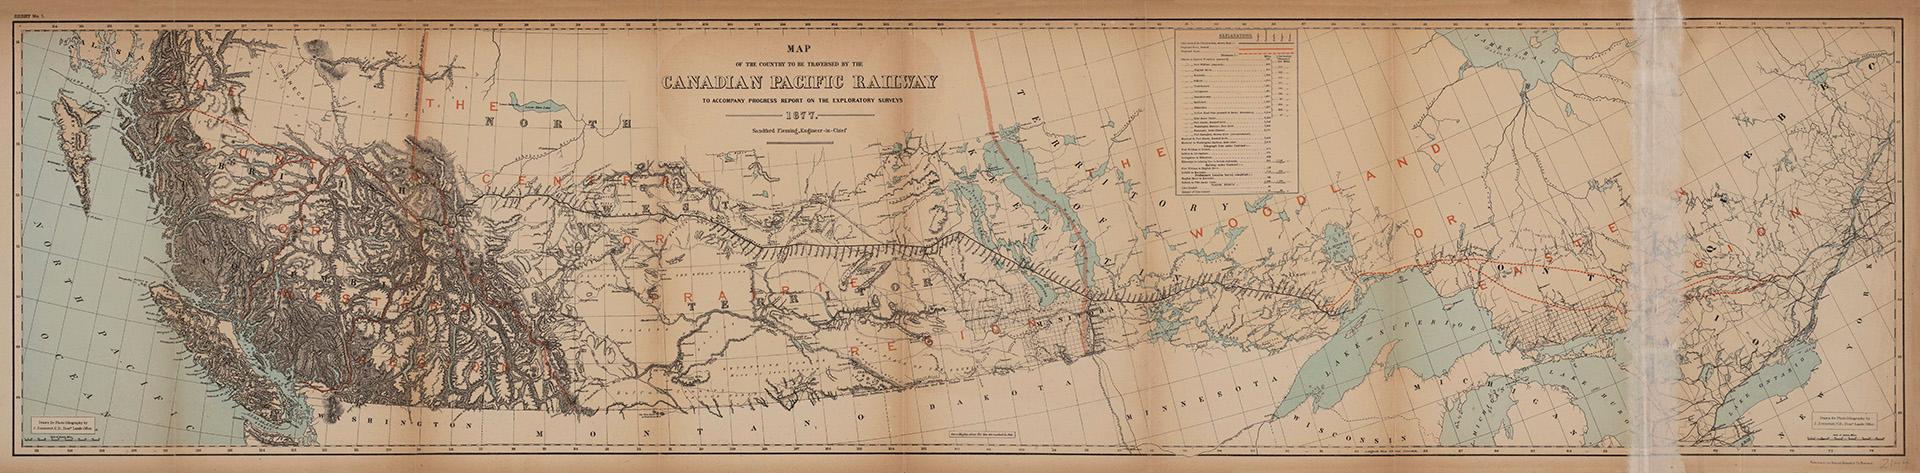 Map of the country to be traversed by the Canadian Pacific Railway to accompany progress report on the exploratory surveys